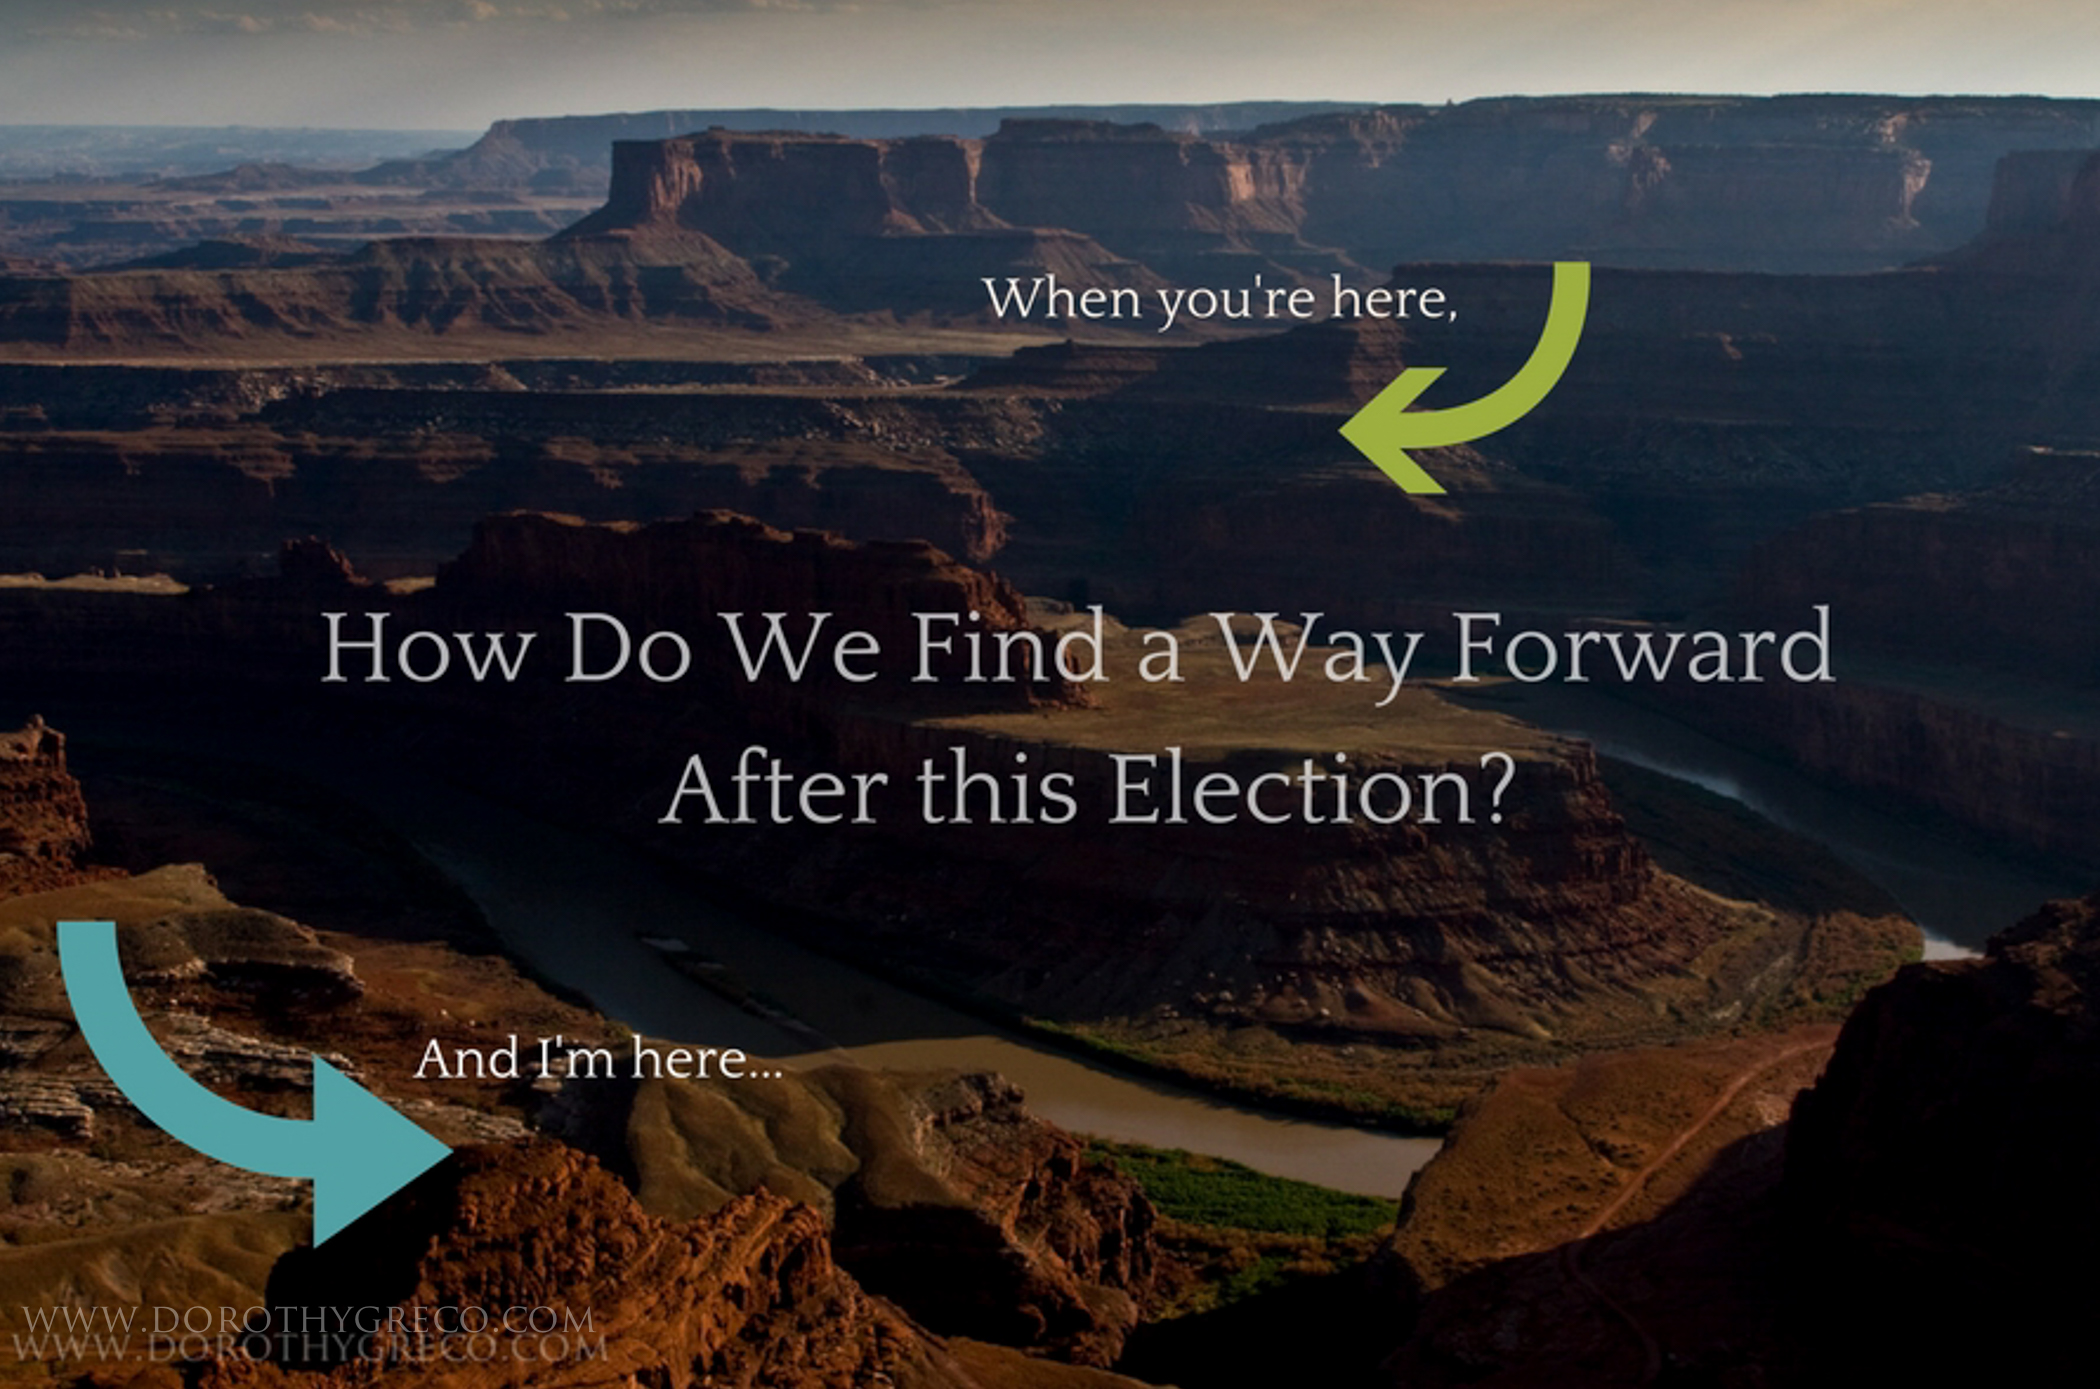 How Do We Find a Way Forward After the Election?